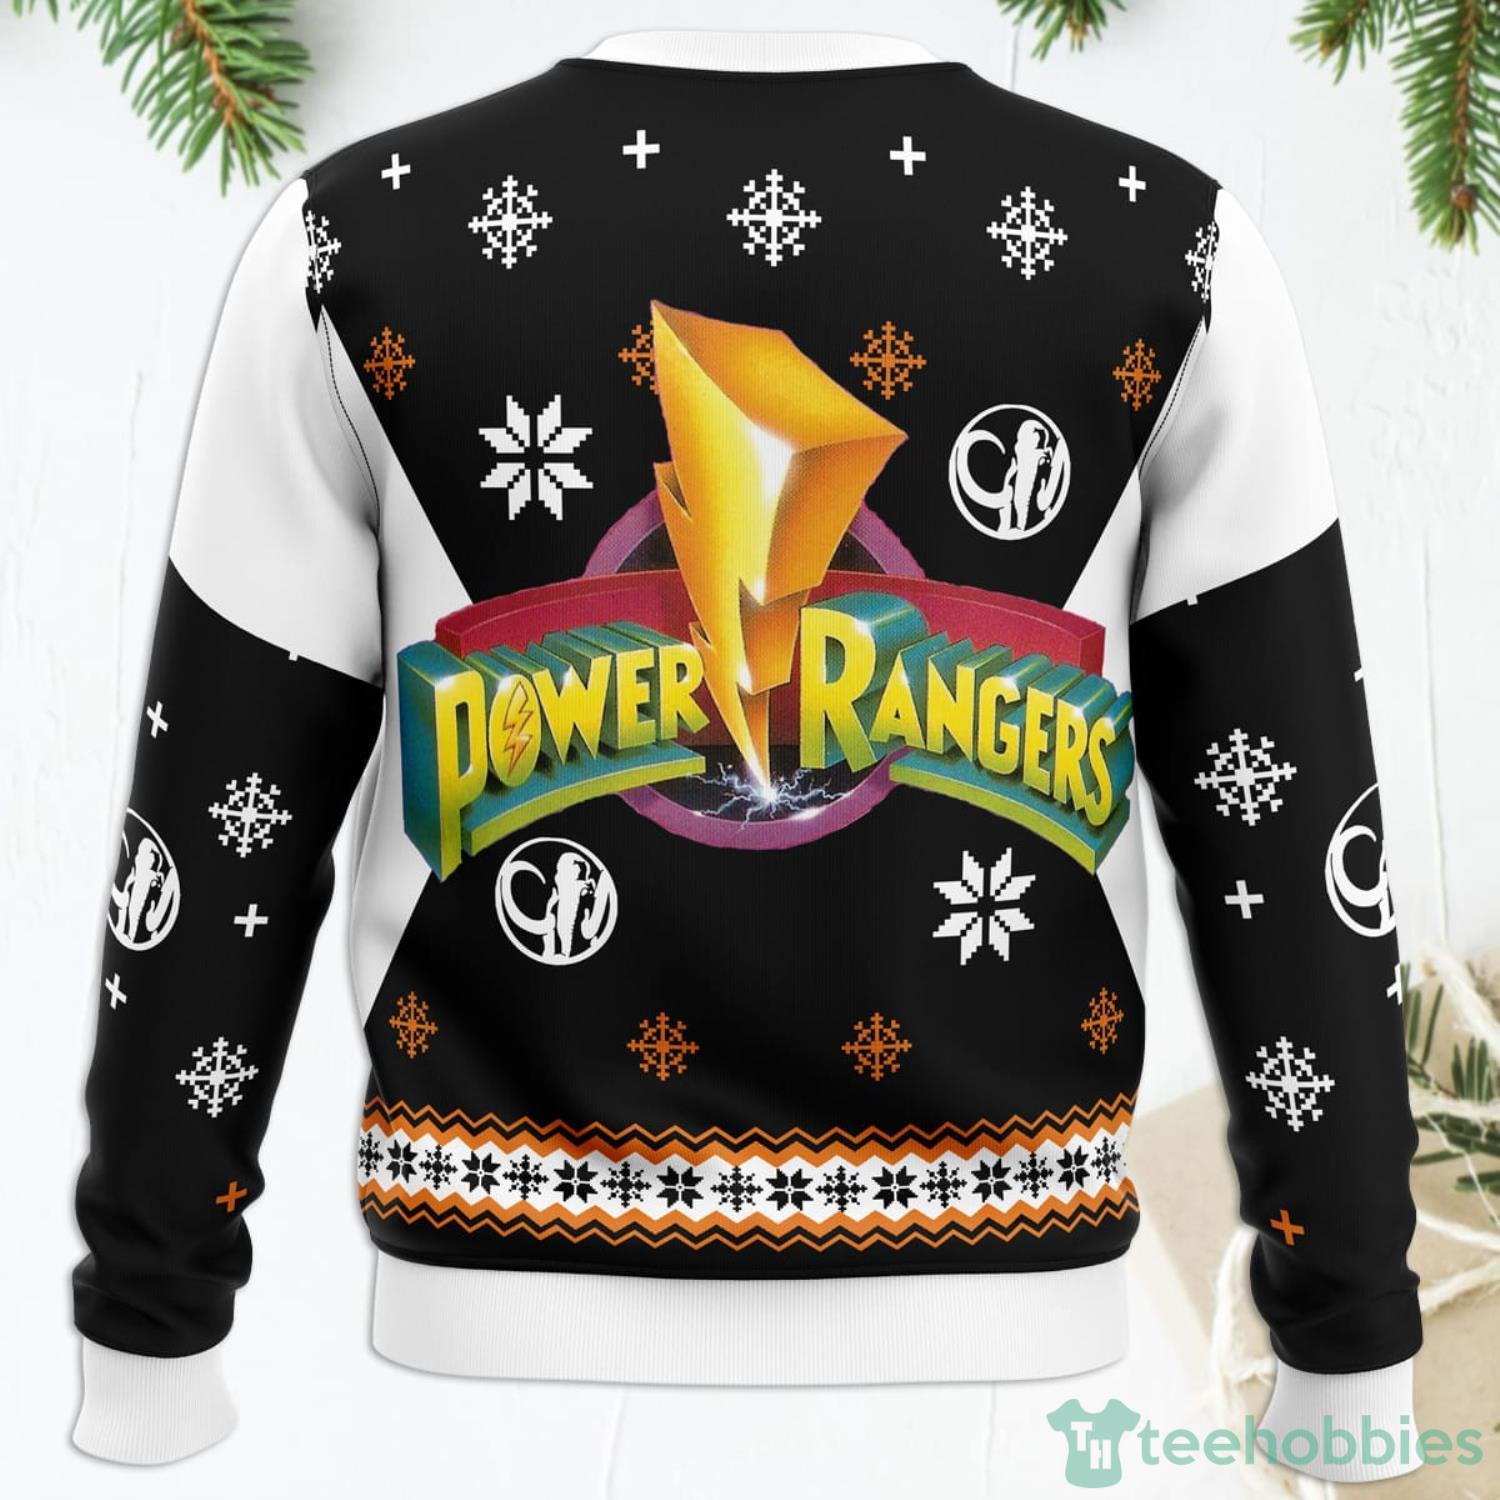 New York Rangers Christmas Sweater – Ugly Christmas Sweater Party